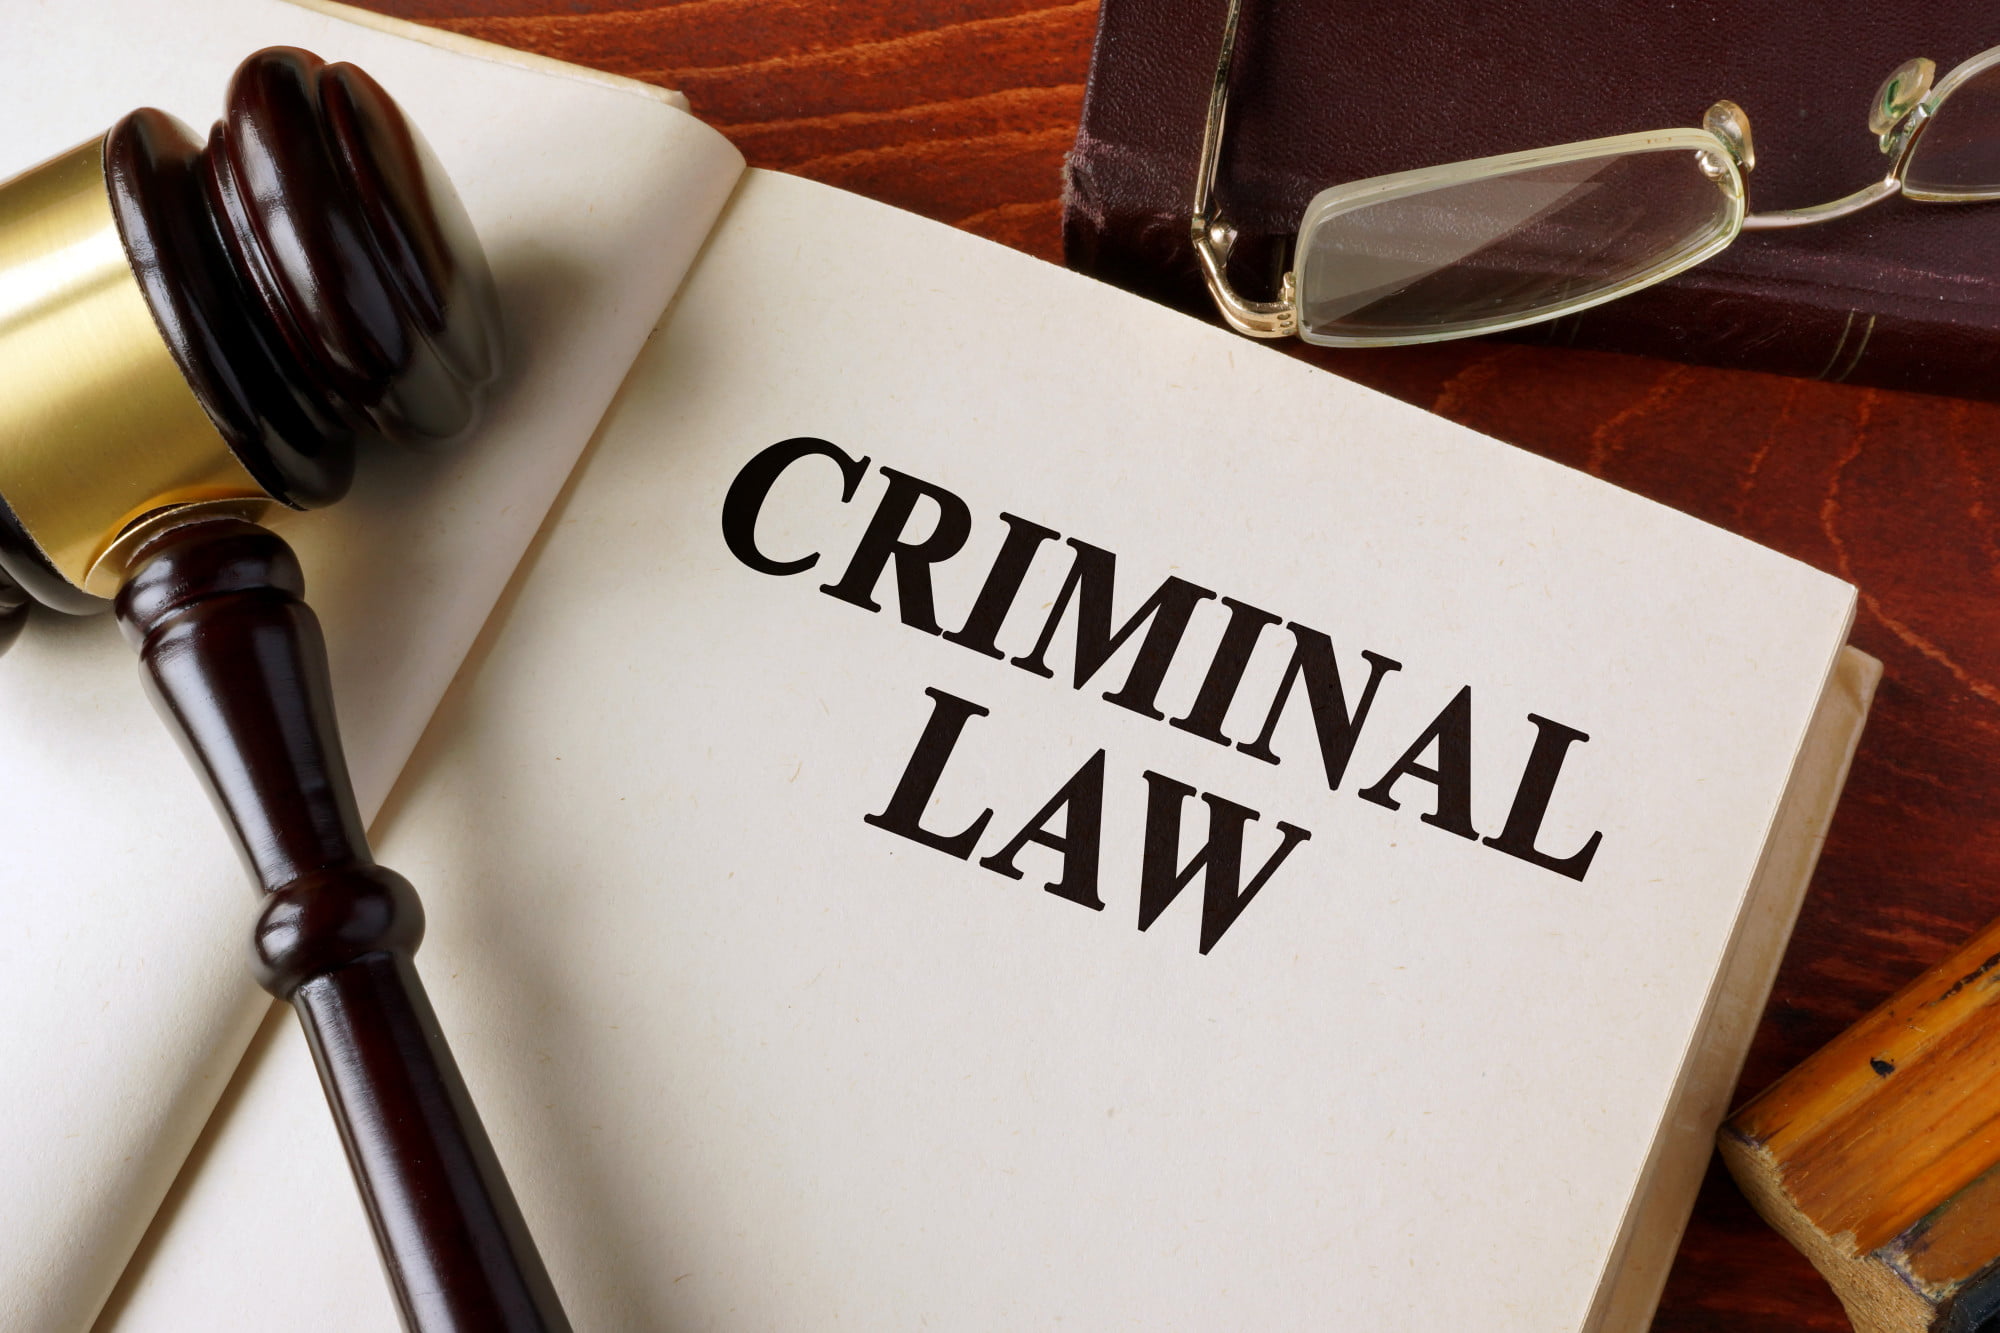 Finding the right attorney for criminal charges requires knowing what not to do. Here are errors in hiring a criminal defense attorney and how to avoid them.